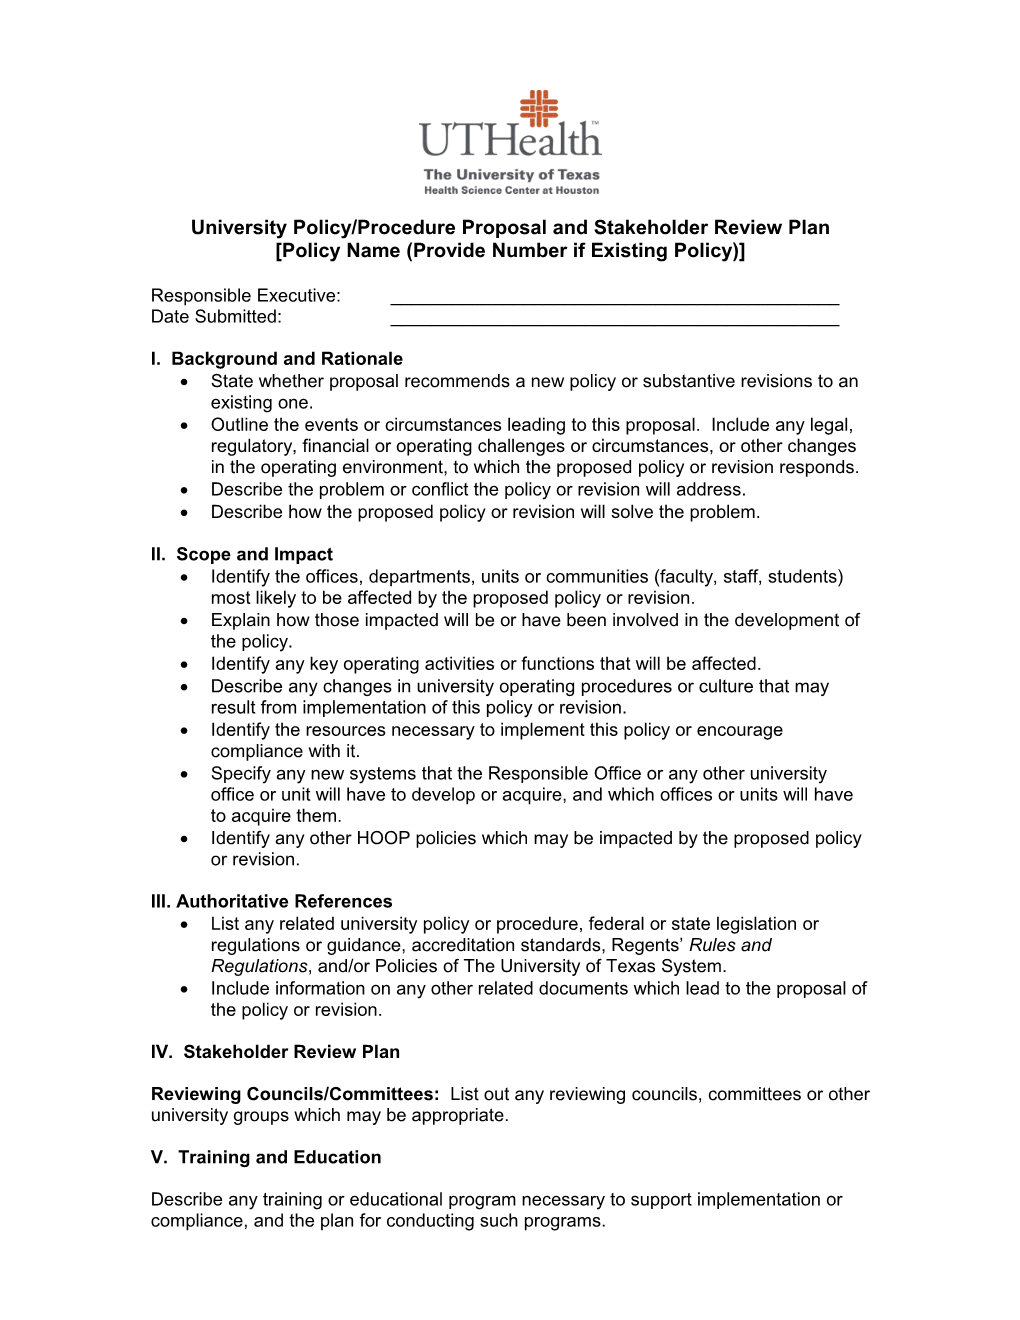 University Policy/Procedure Proposal and Stakeholder Review Plan